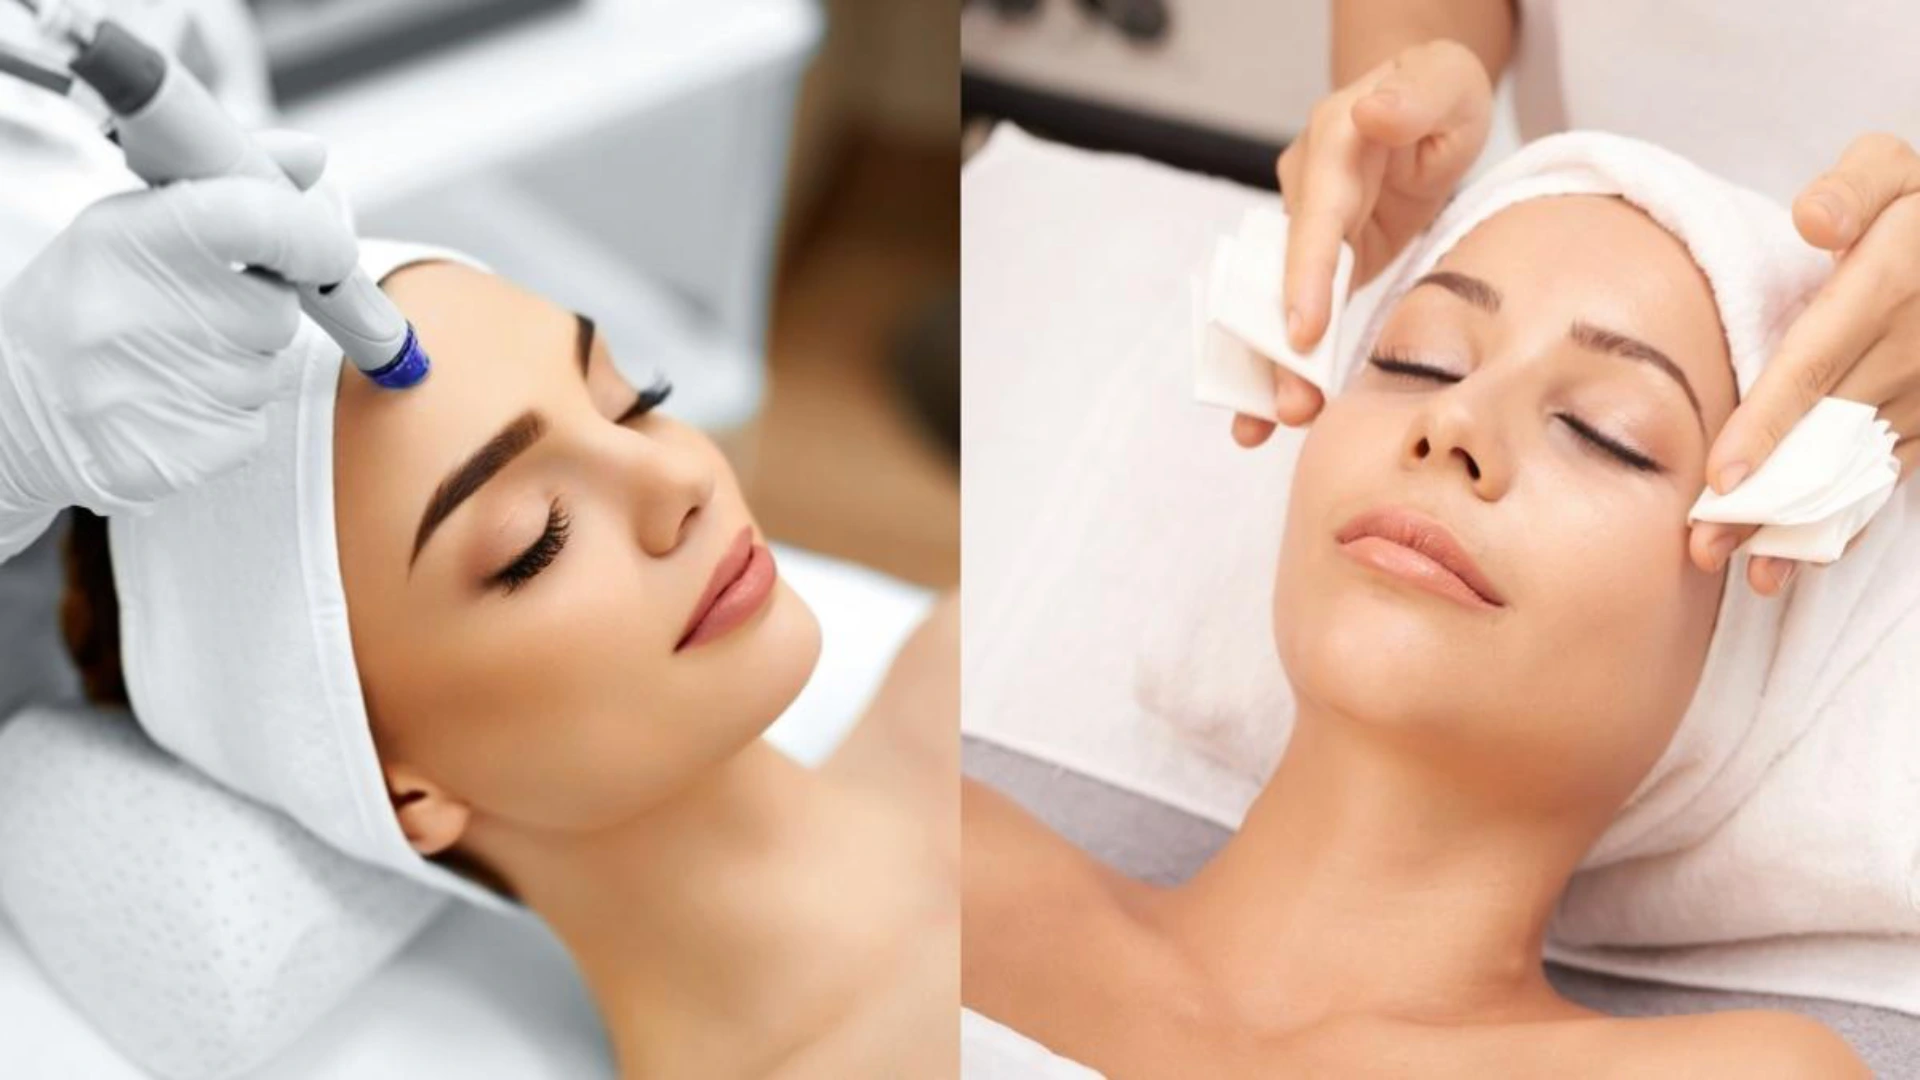 Compare skin glow drips and traditional spa facials to help you choose the ideal treatment for achieving your glowing skin goals.